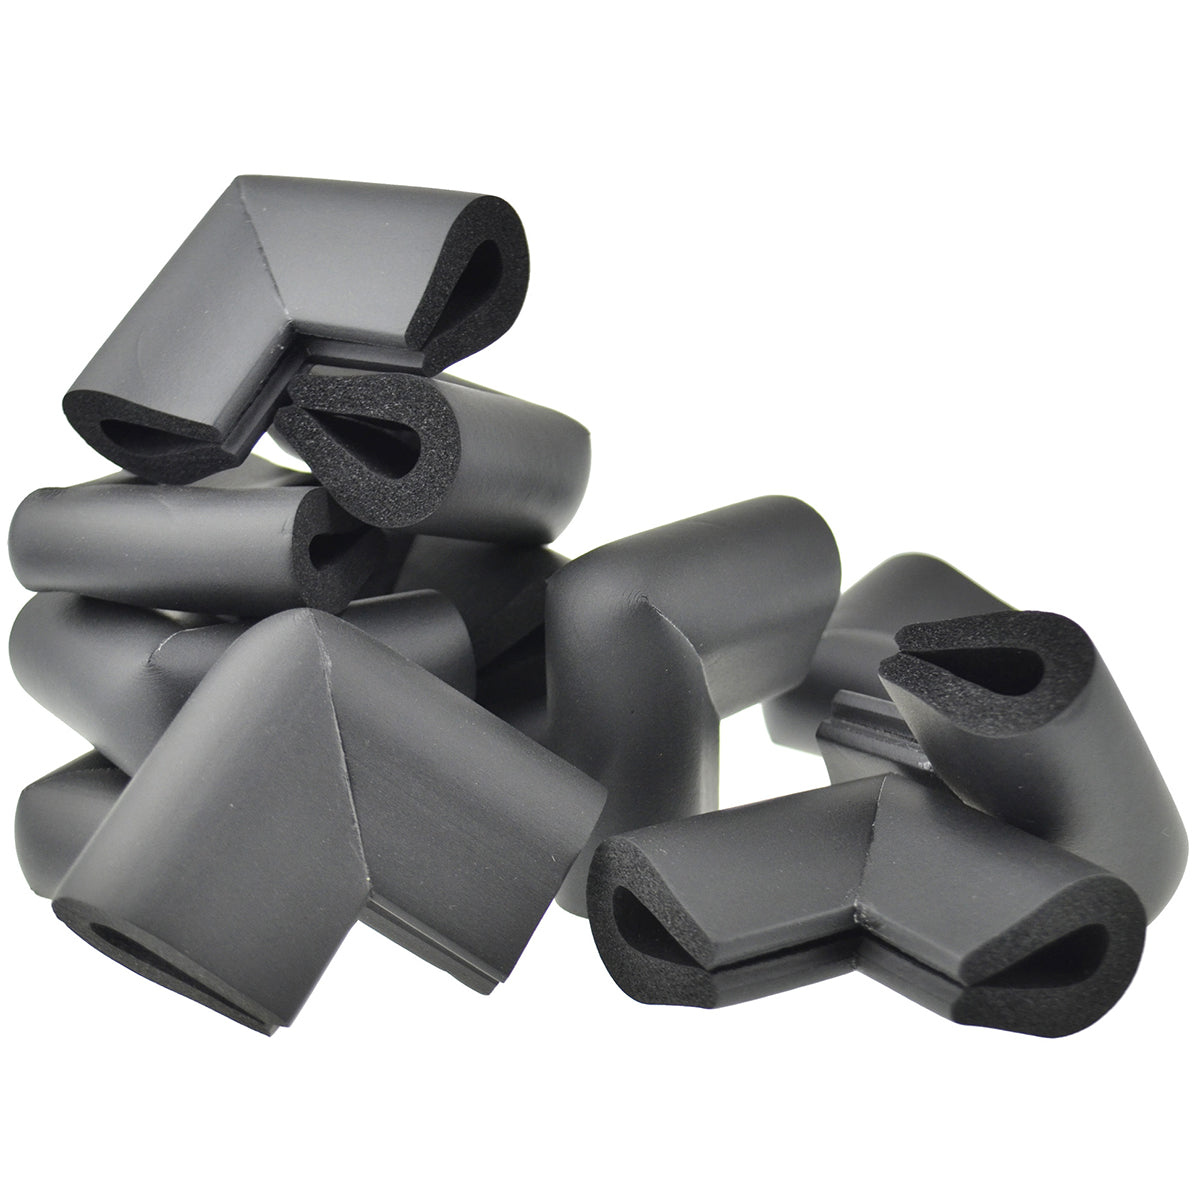 12 pieces black u-shaped foam corner protectors show with a white background.